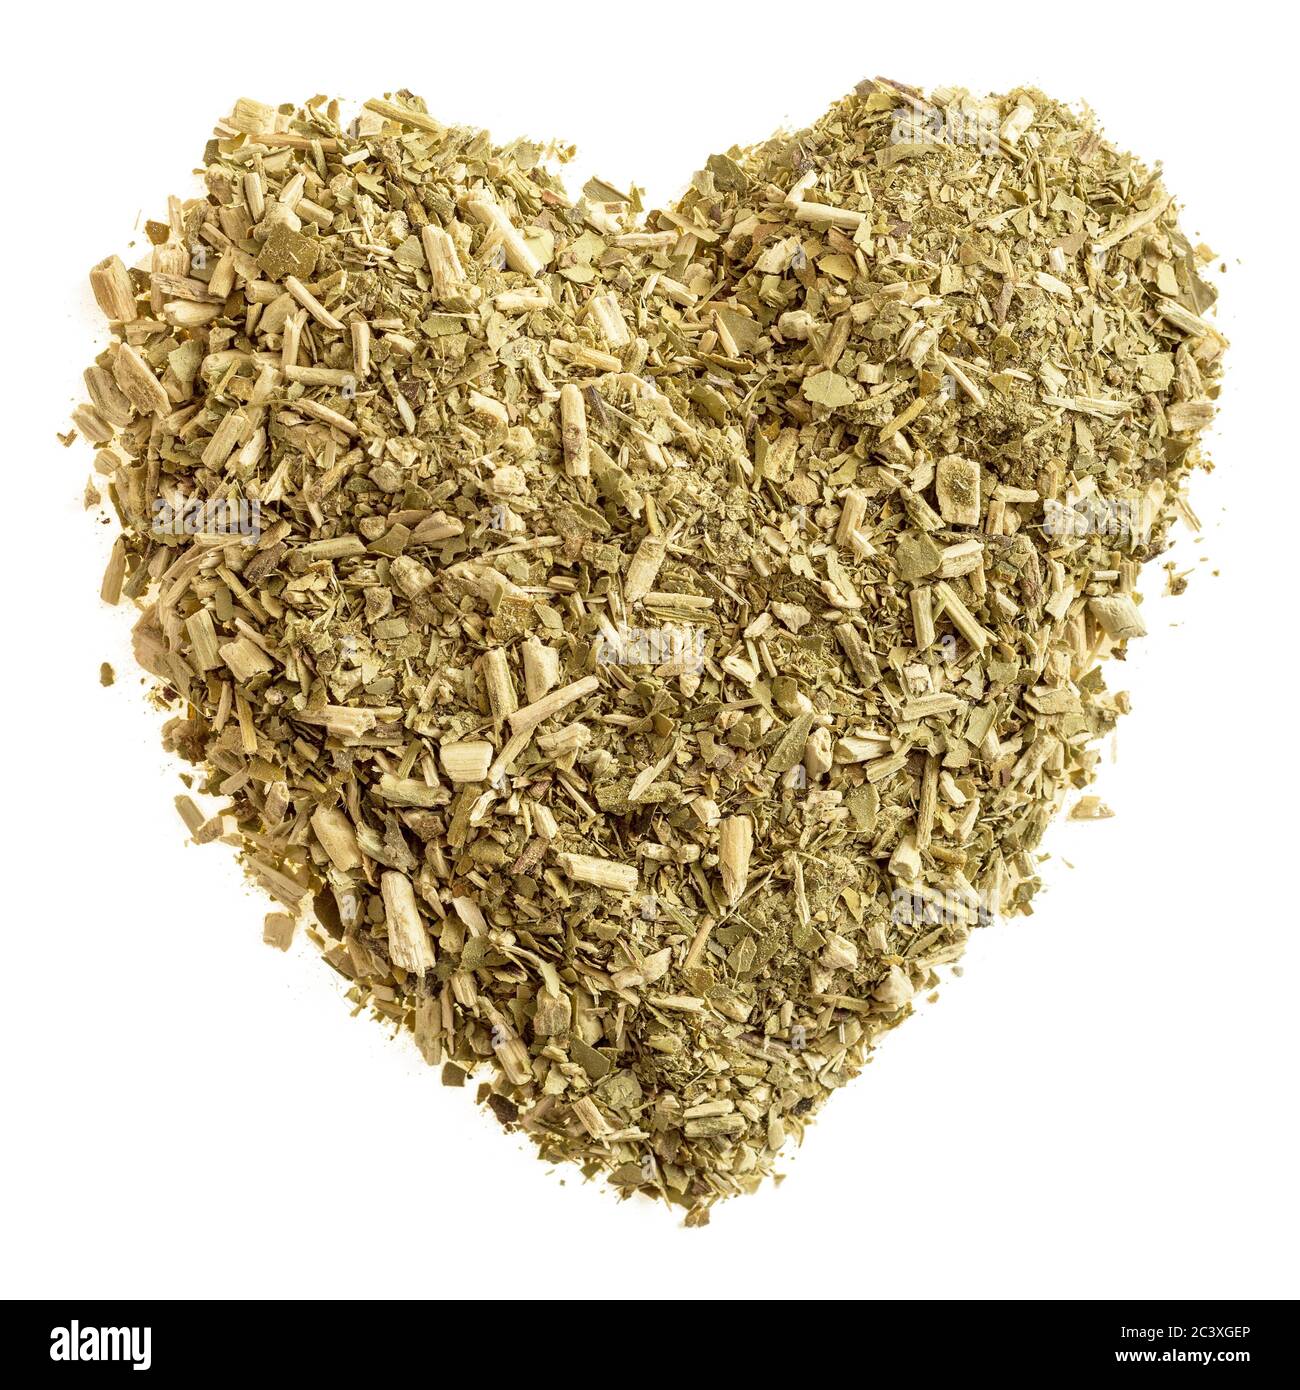 Heart of dry tea leaves with mate on white background isolate Stock Photo